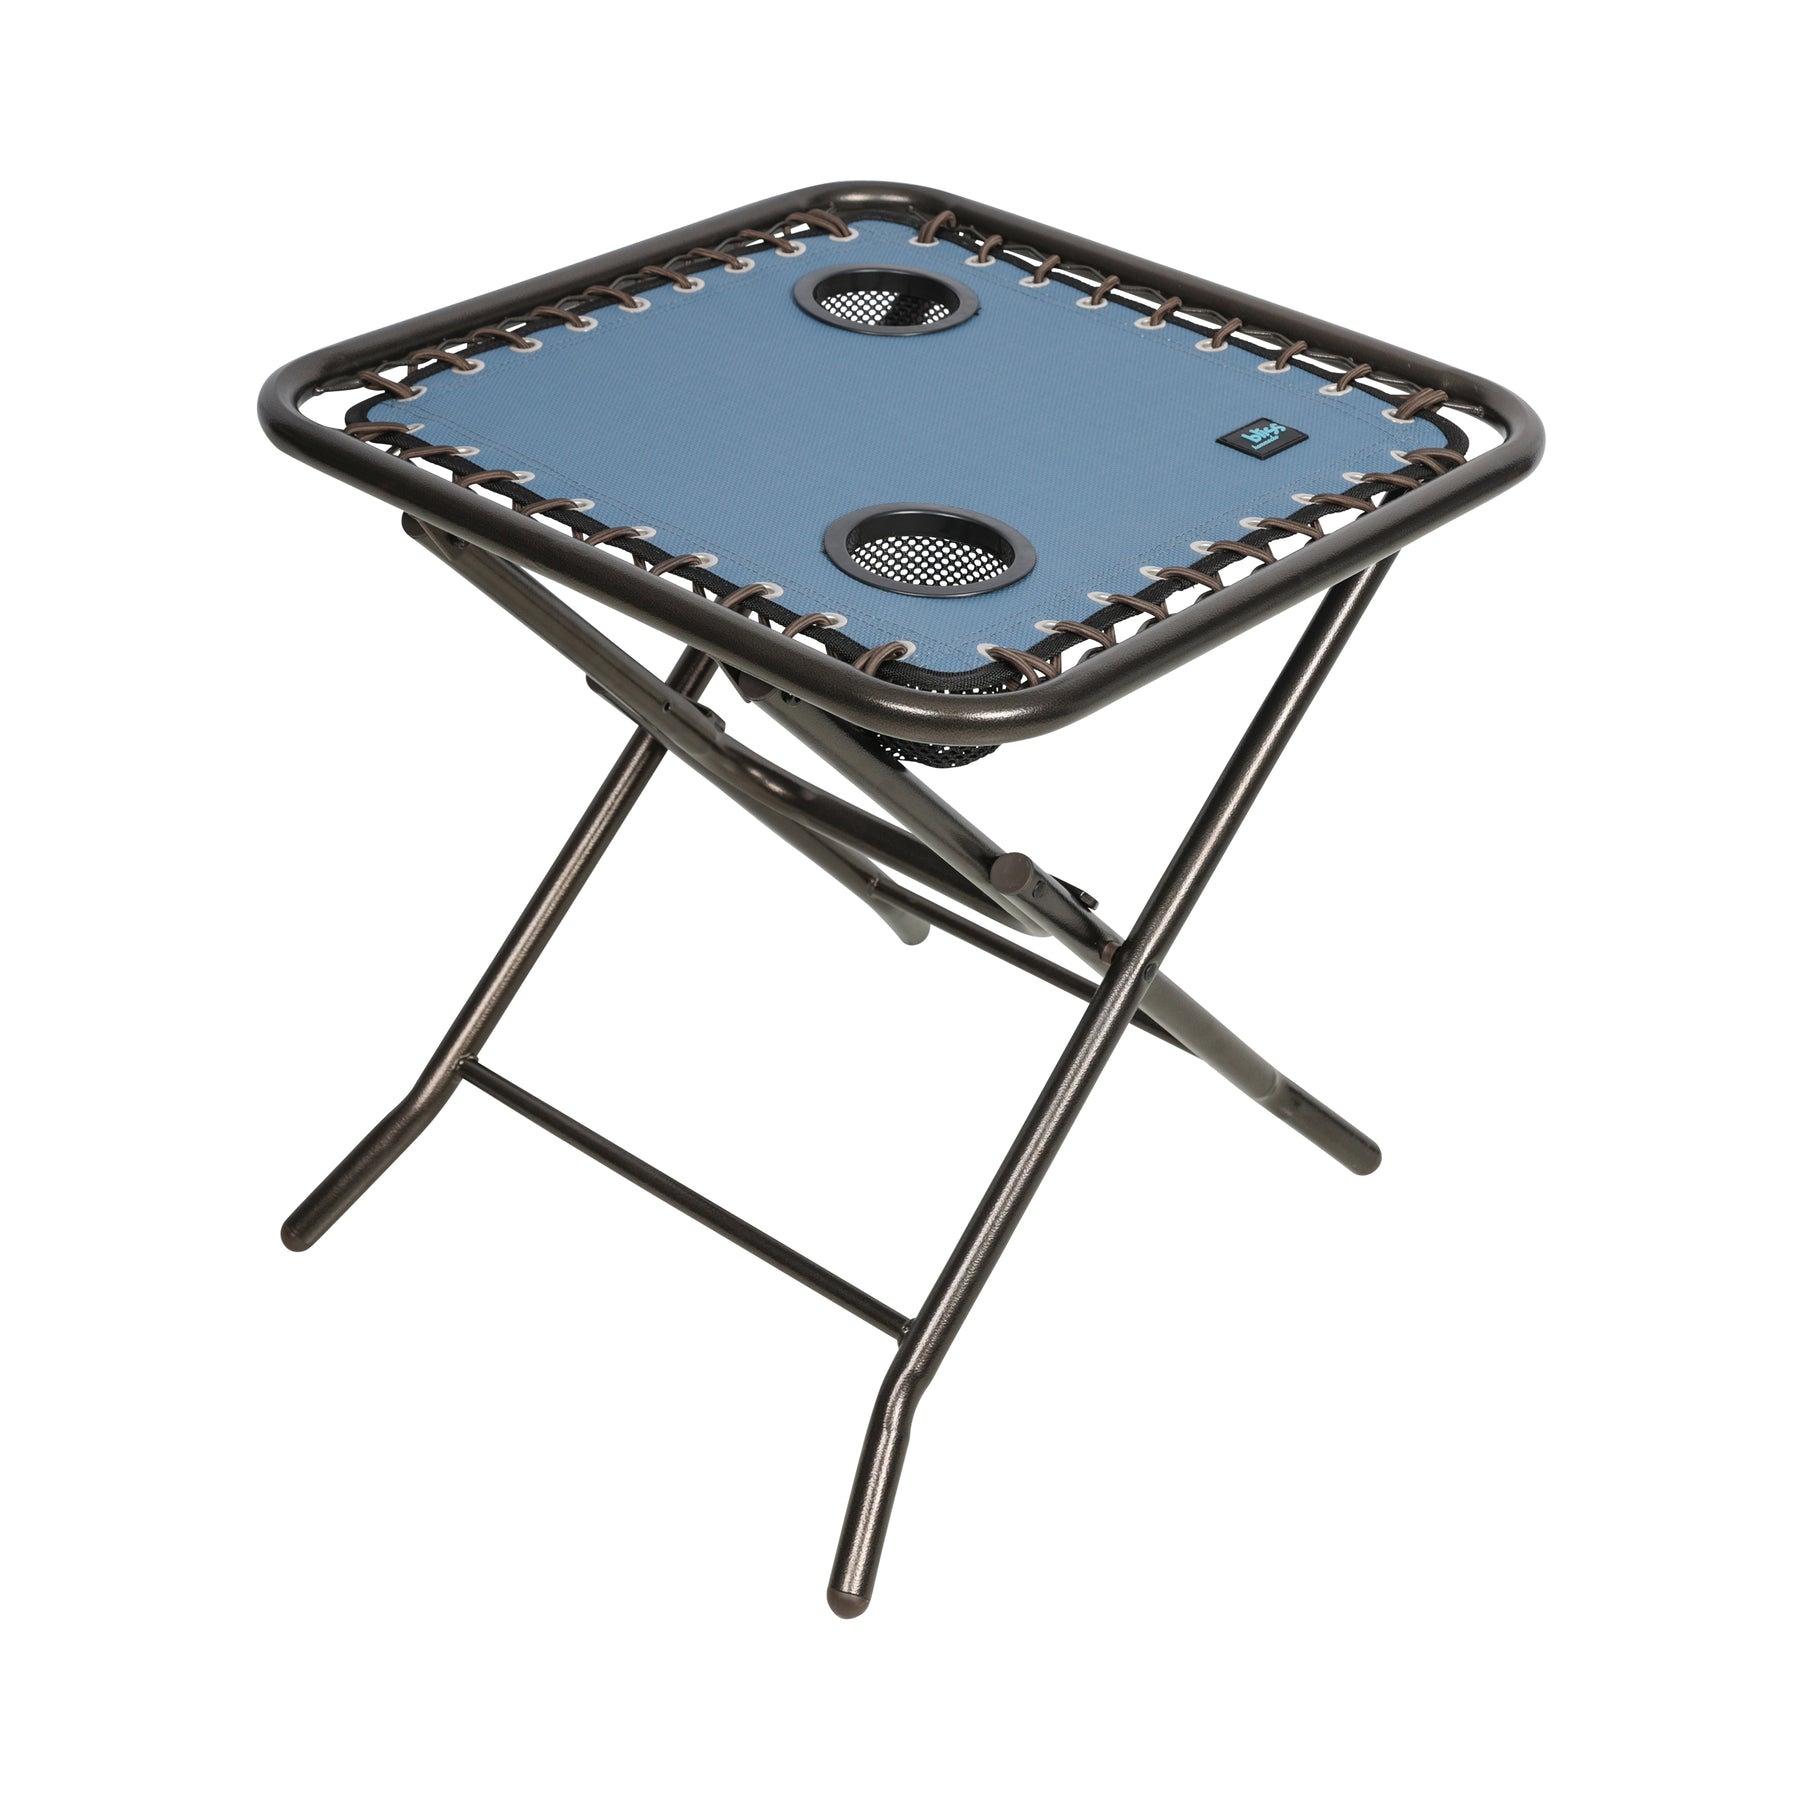 Bliss Hammocks 20-inch Folding Side Table with 2 Built-In Cup Holders in the denim blue variation.